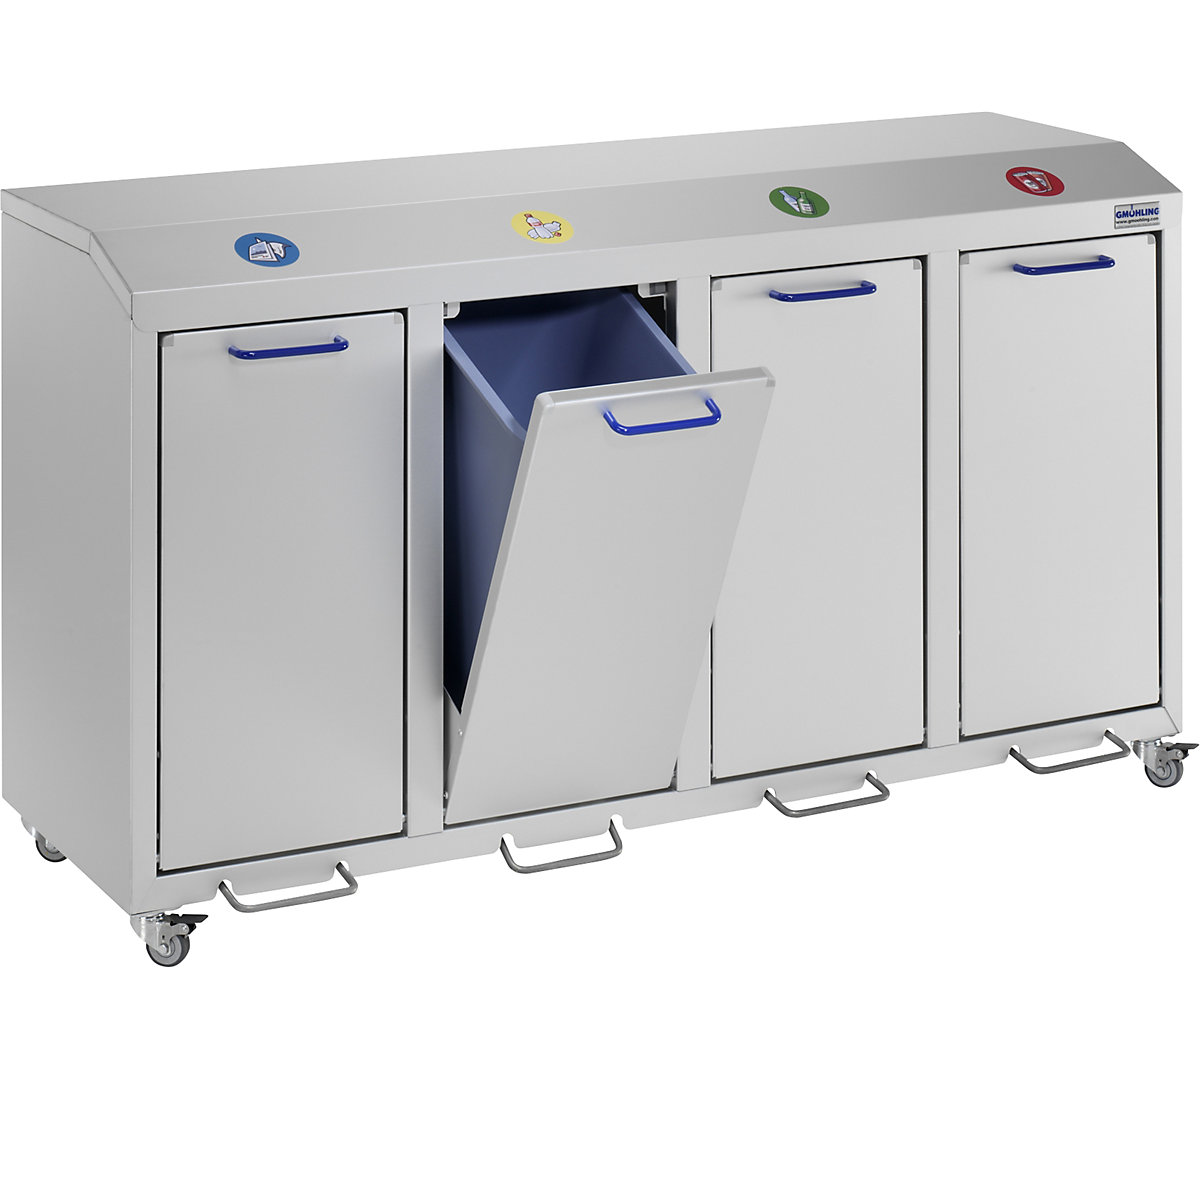 G®-COLLECT aluminium recyclable waste collector - Gmöhling